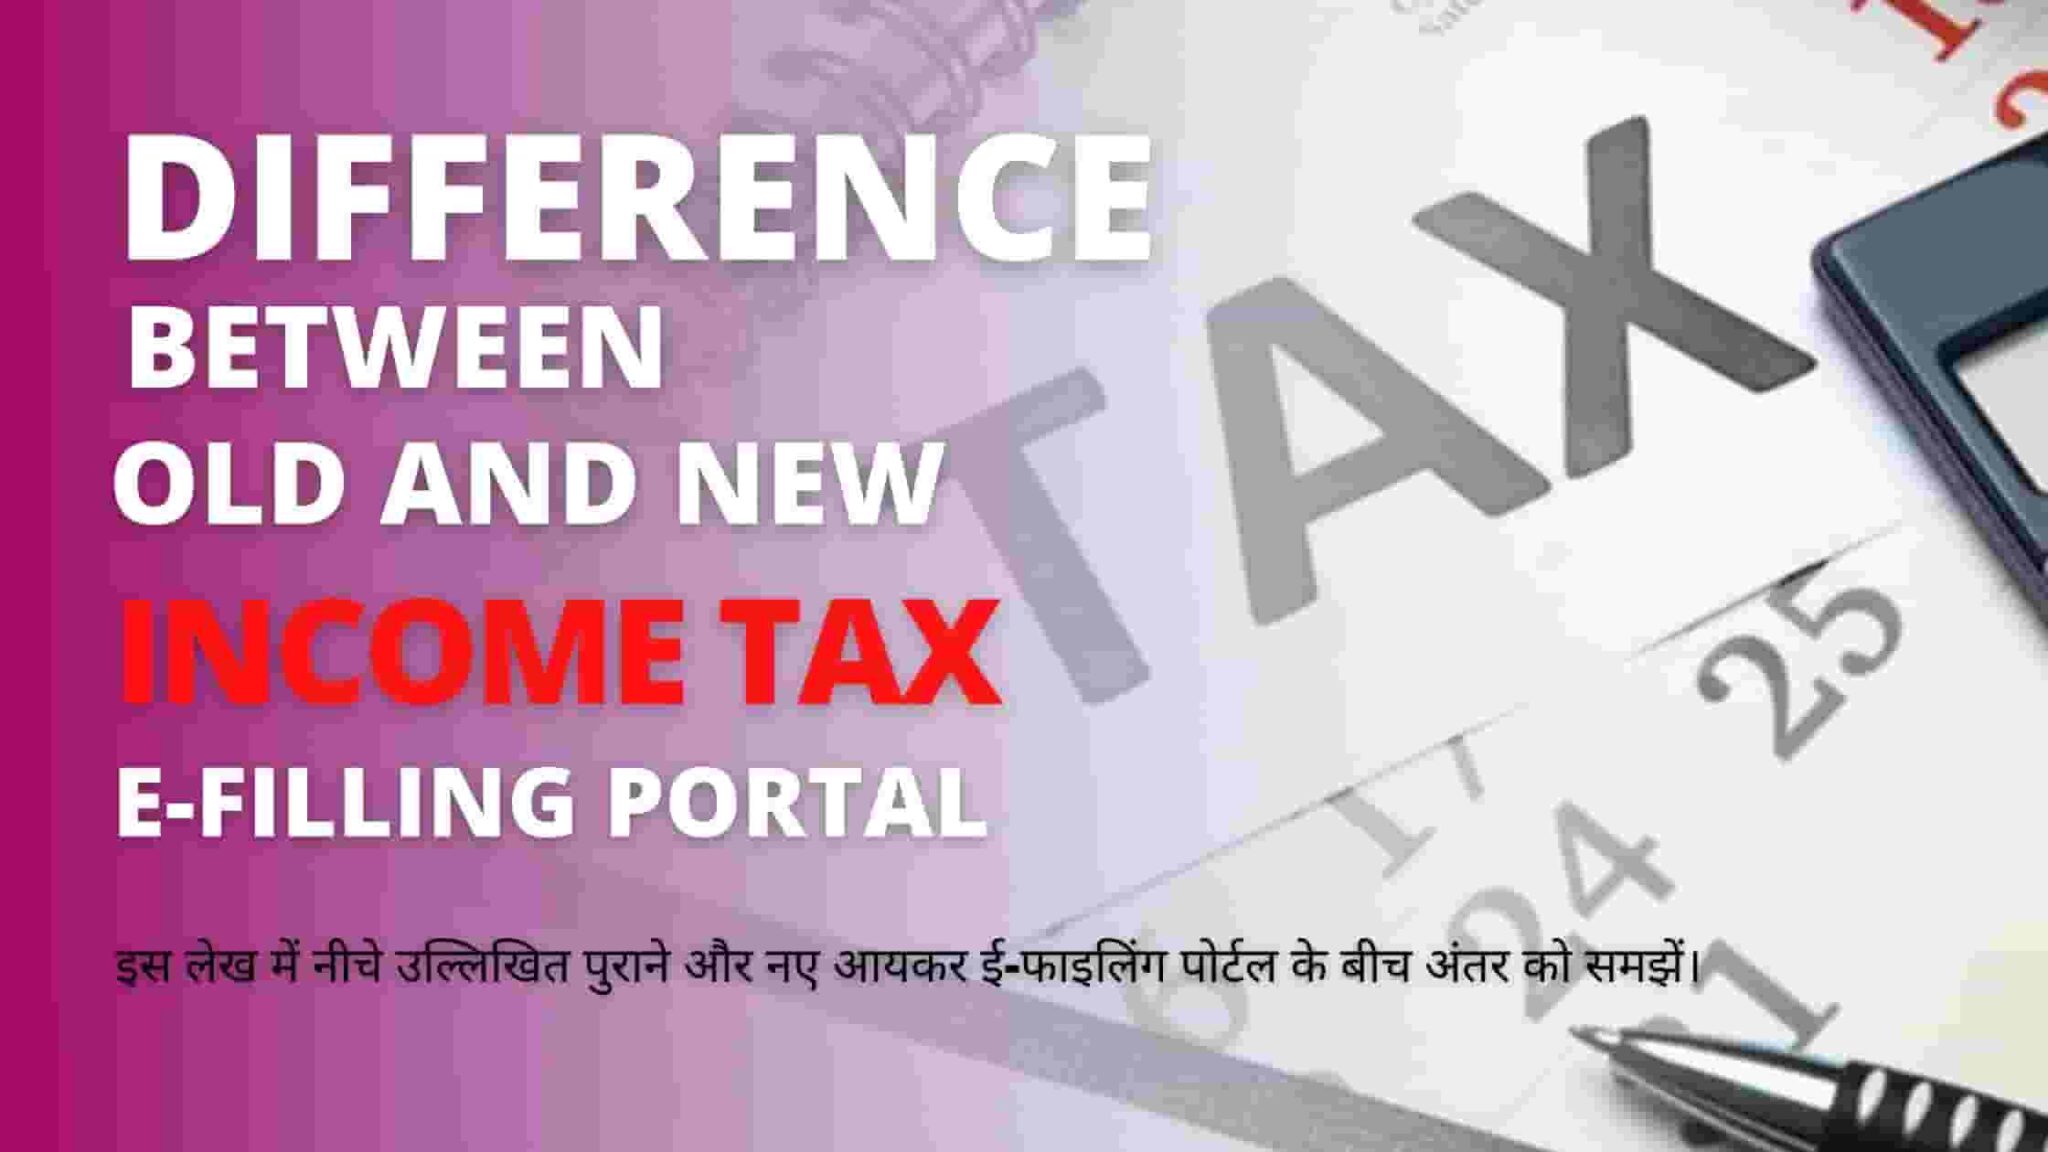 Difference between old and new Income Tax e-filing Portal in Hindi